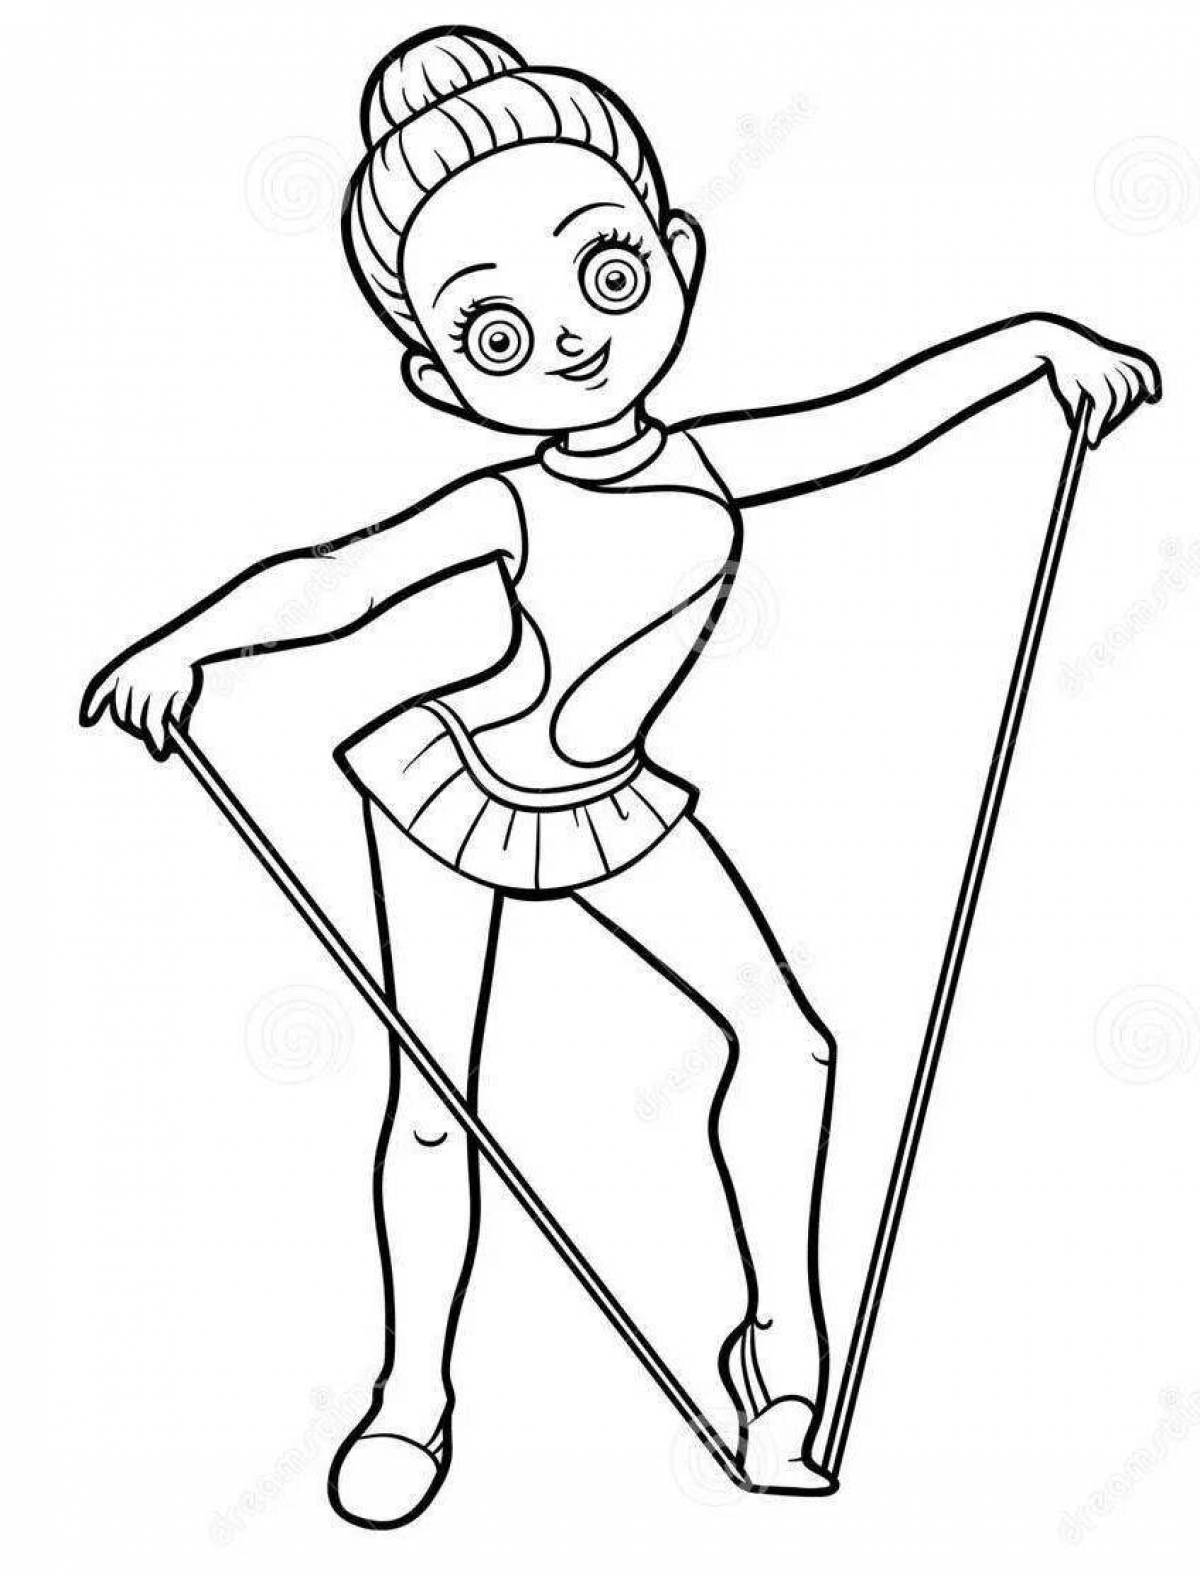 Playful gymnastic coloring book for girls